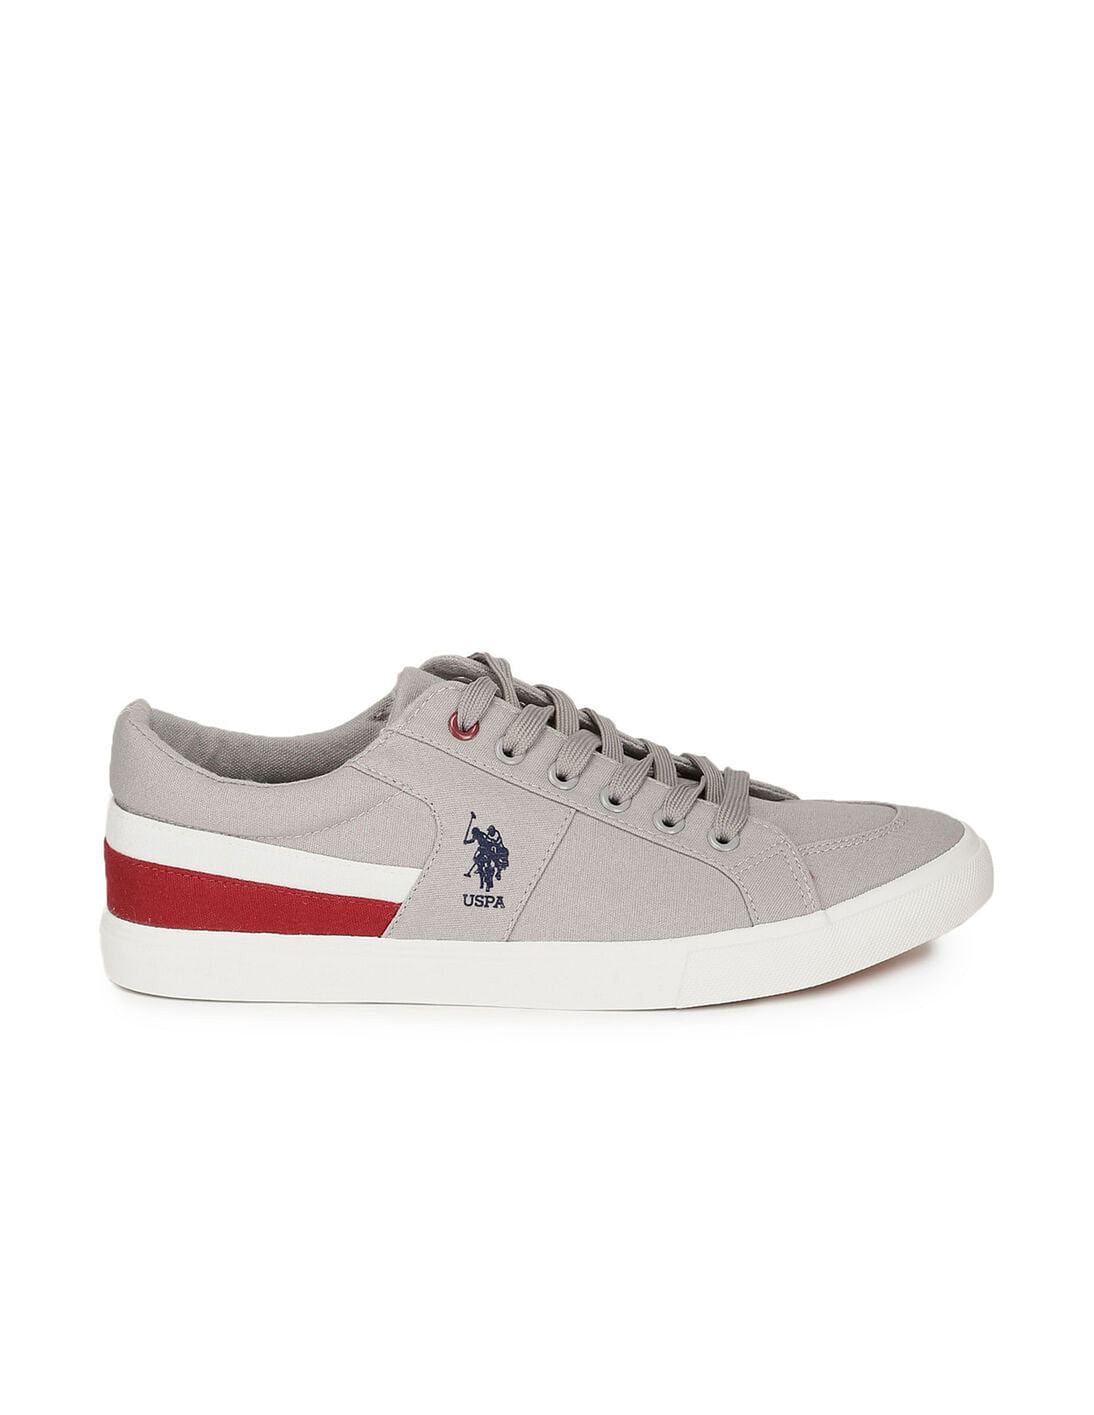 Polo Ralph Lauren Canvas Uppers Navy Blue Red Casual Sneakers Shoes - Men's  12D | eBay